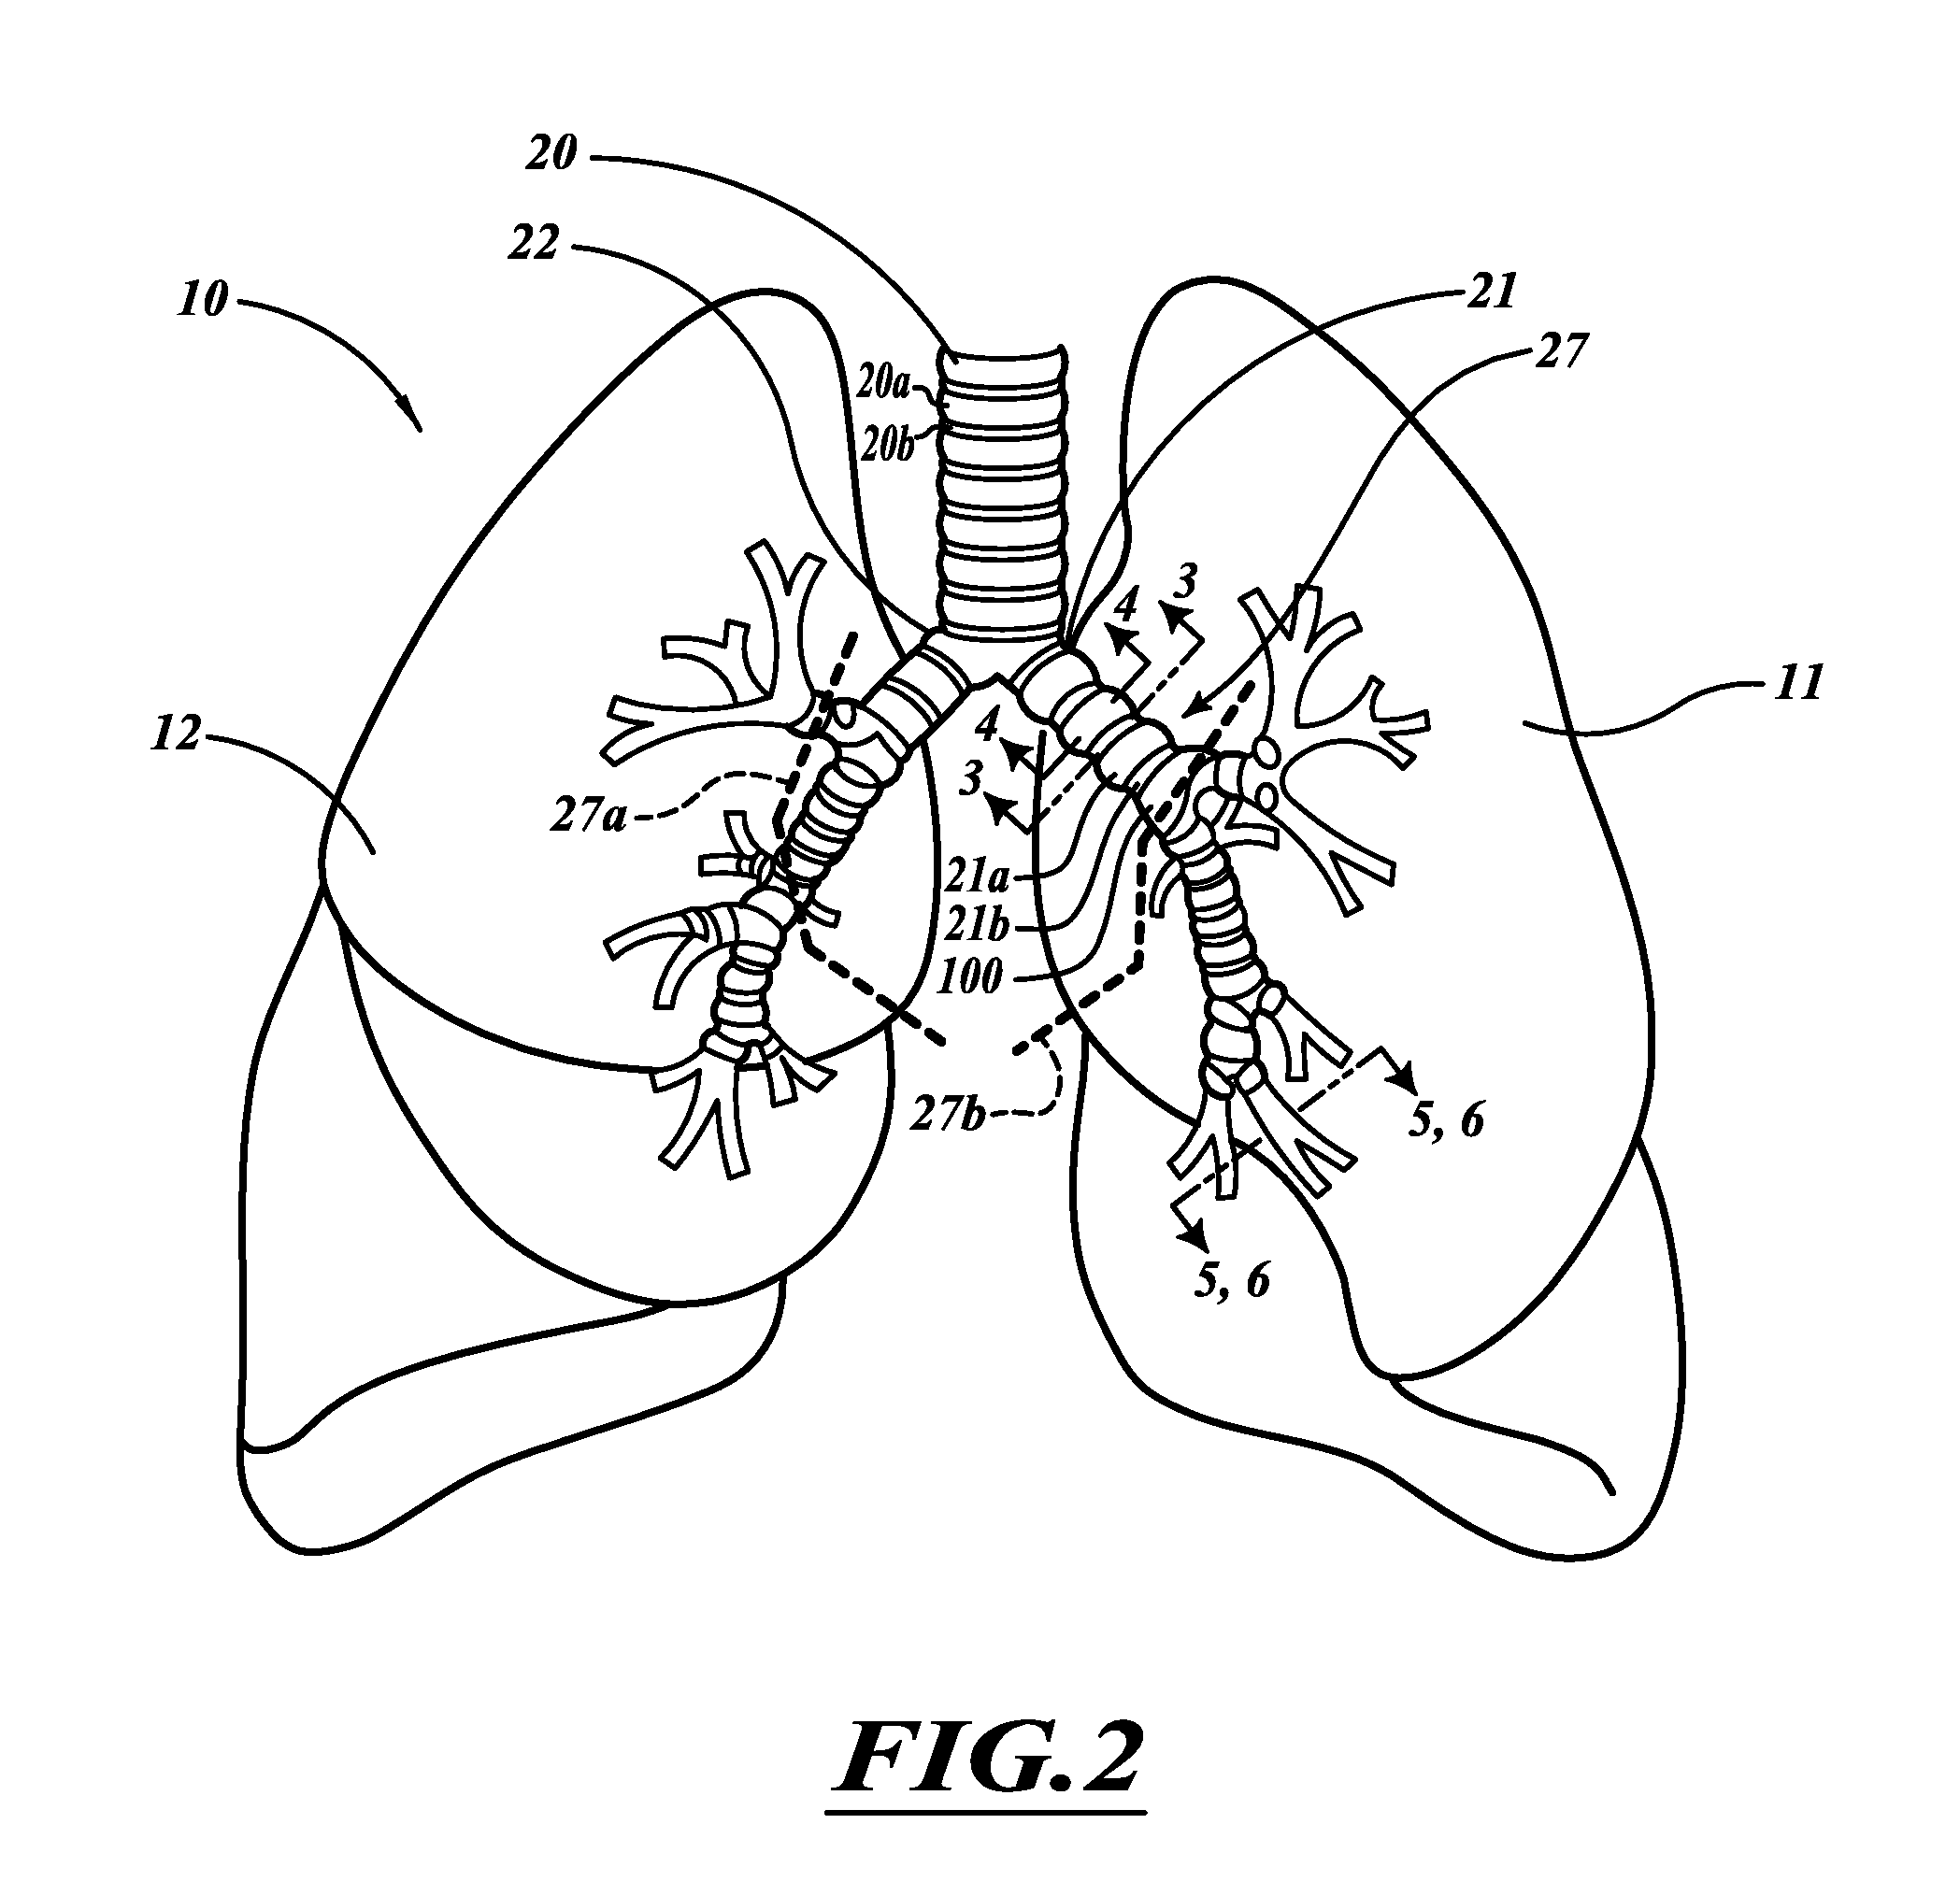 Compact delivery pulmonary treatment systems and methods for improving pulmonary function